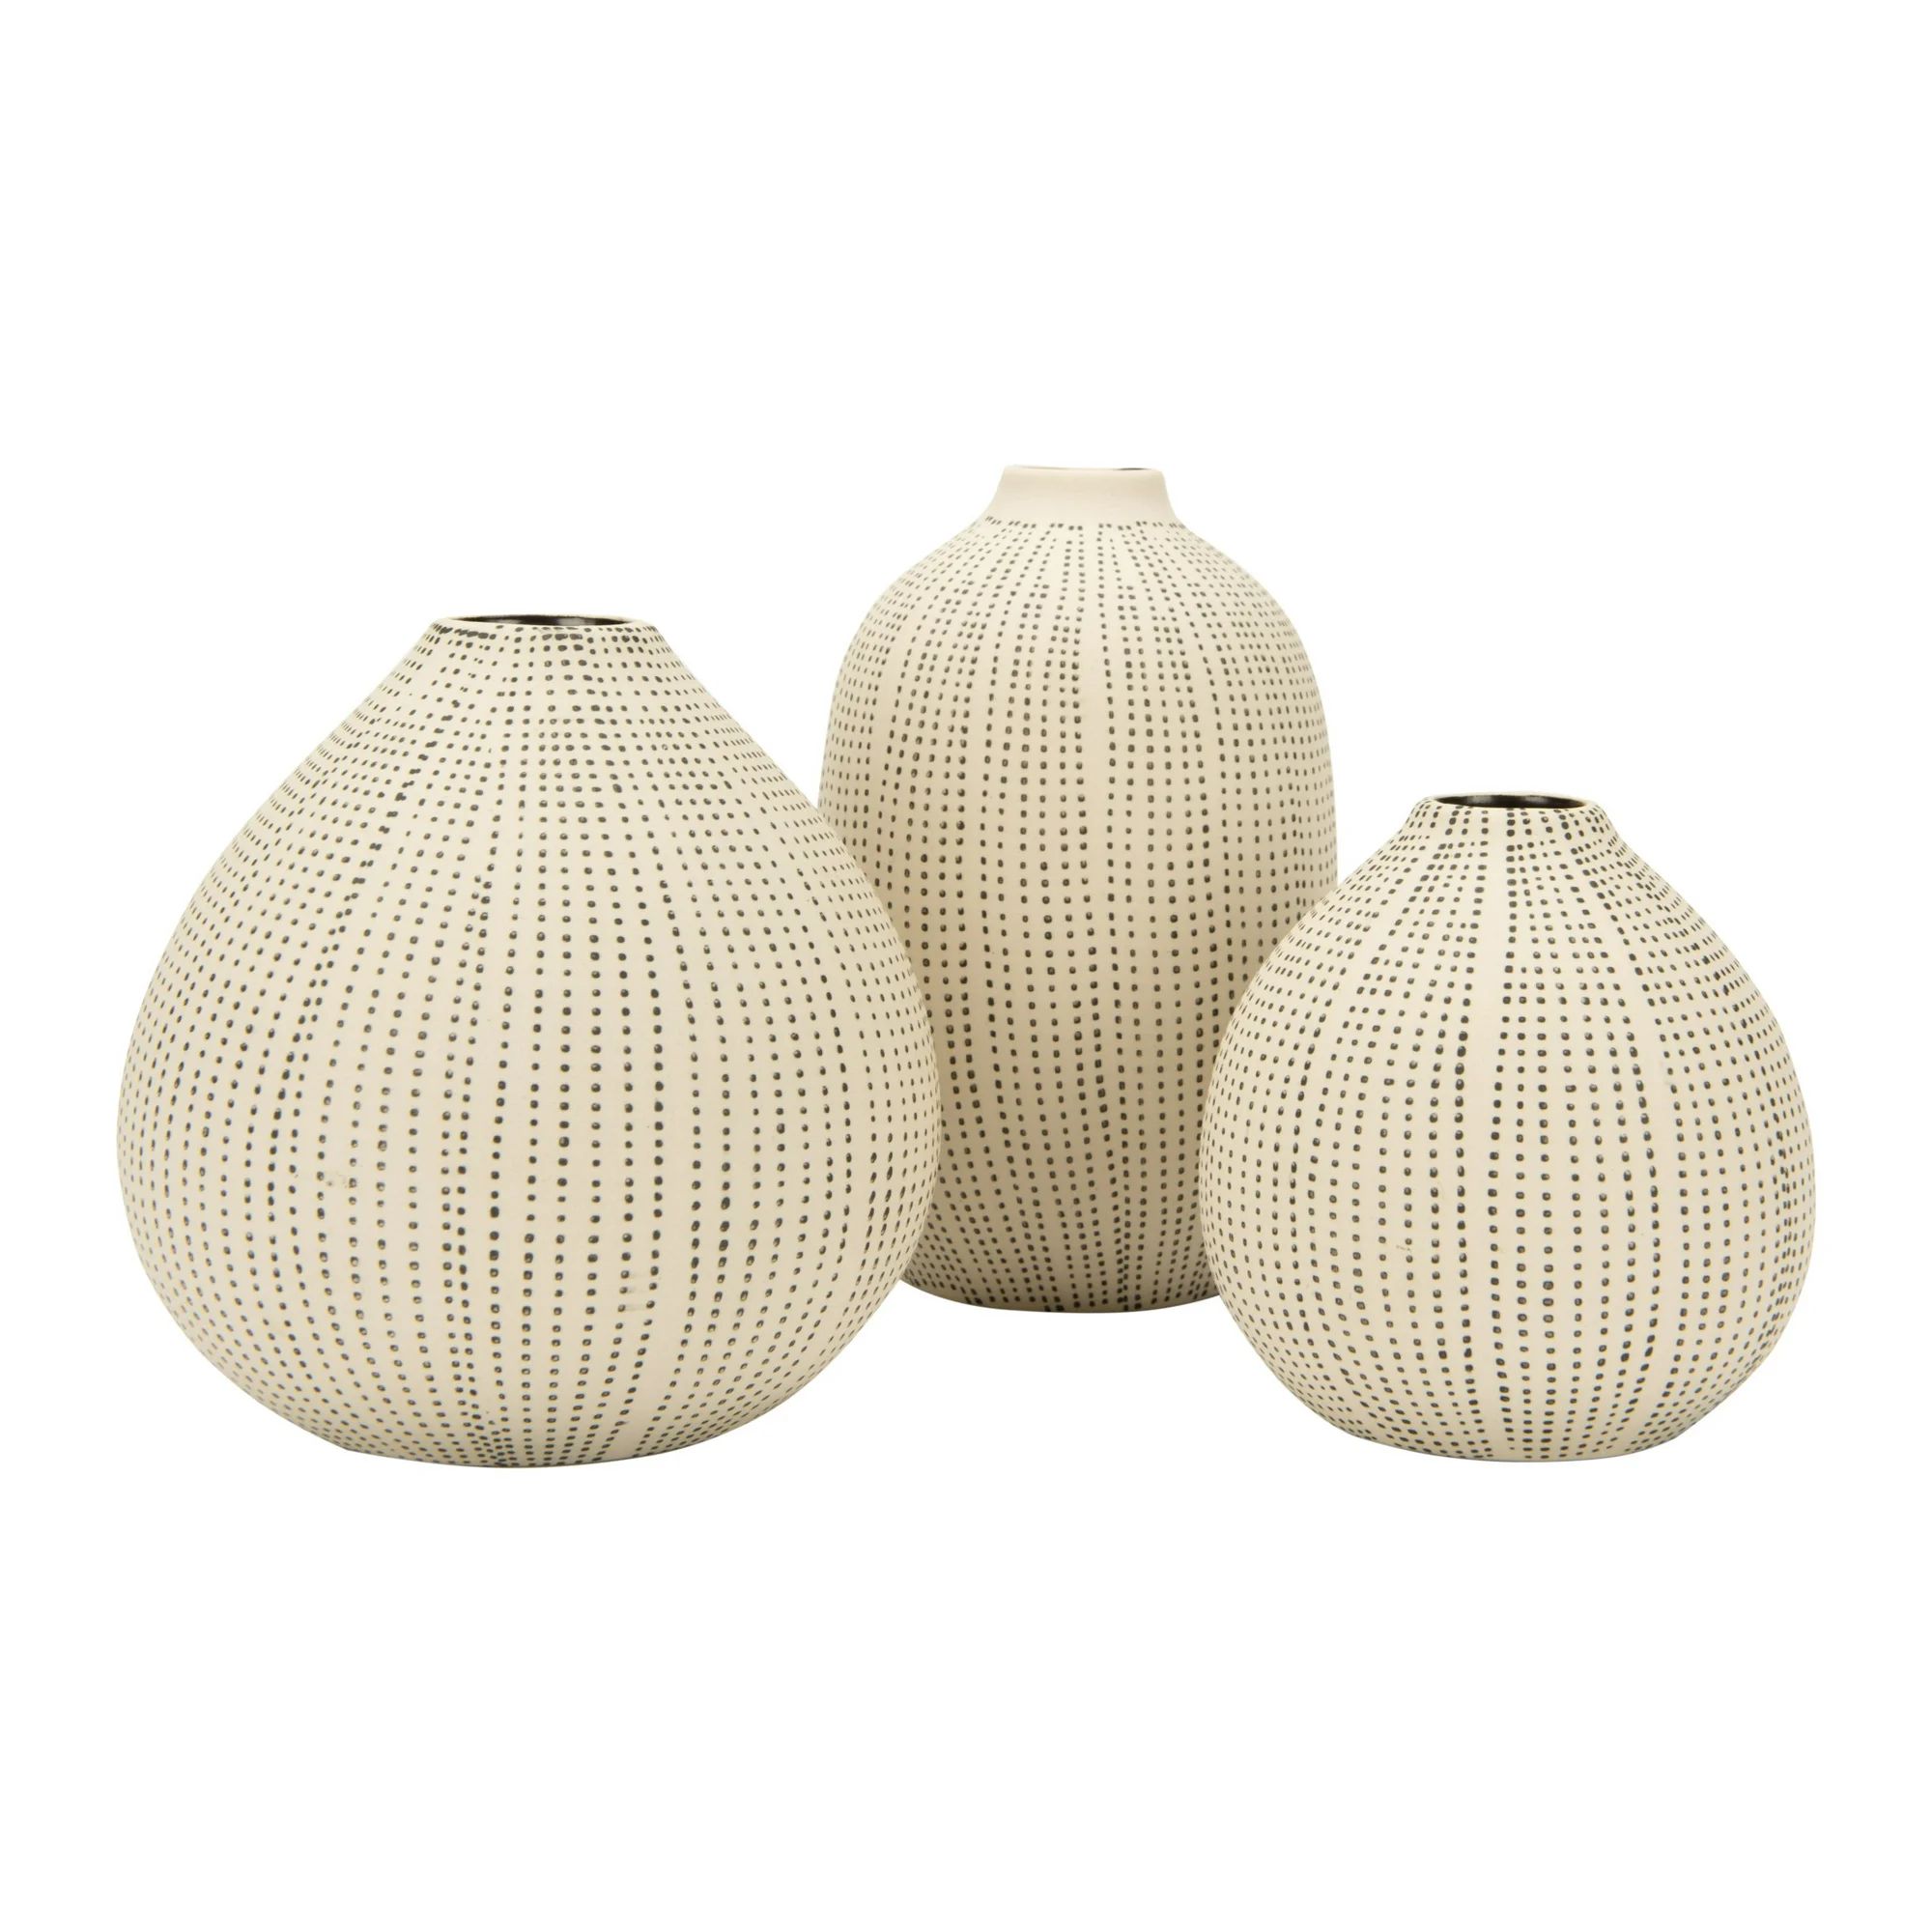 Creative Co-Op Round Stoneware Vases with Polka Dot Finish, White and Black, Set of 3 | Walmart (US)